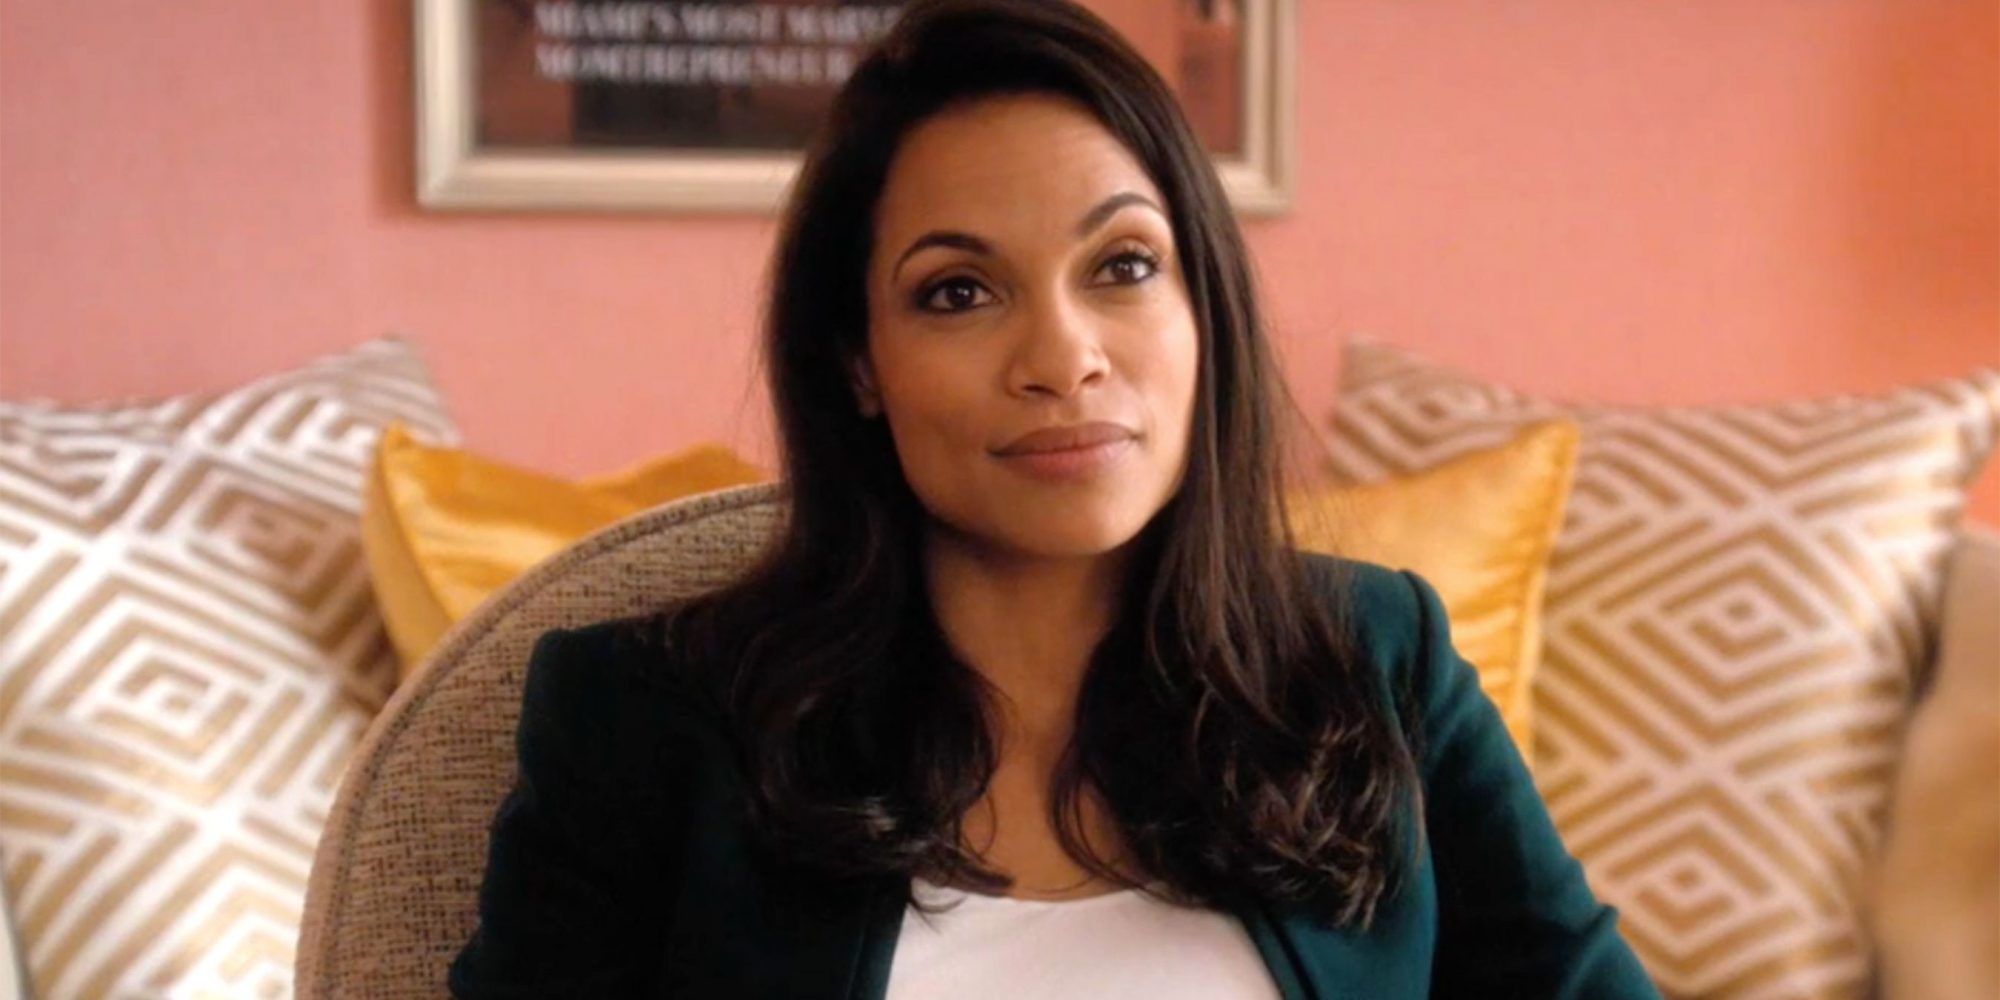 Rosario Dawson sitting on a couch with a pink wall in the background